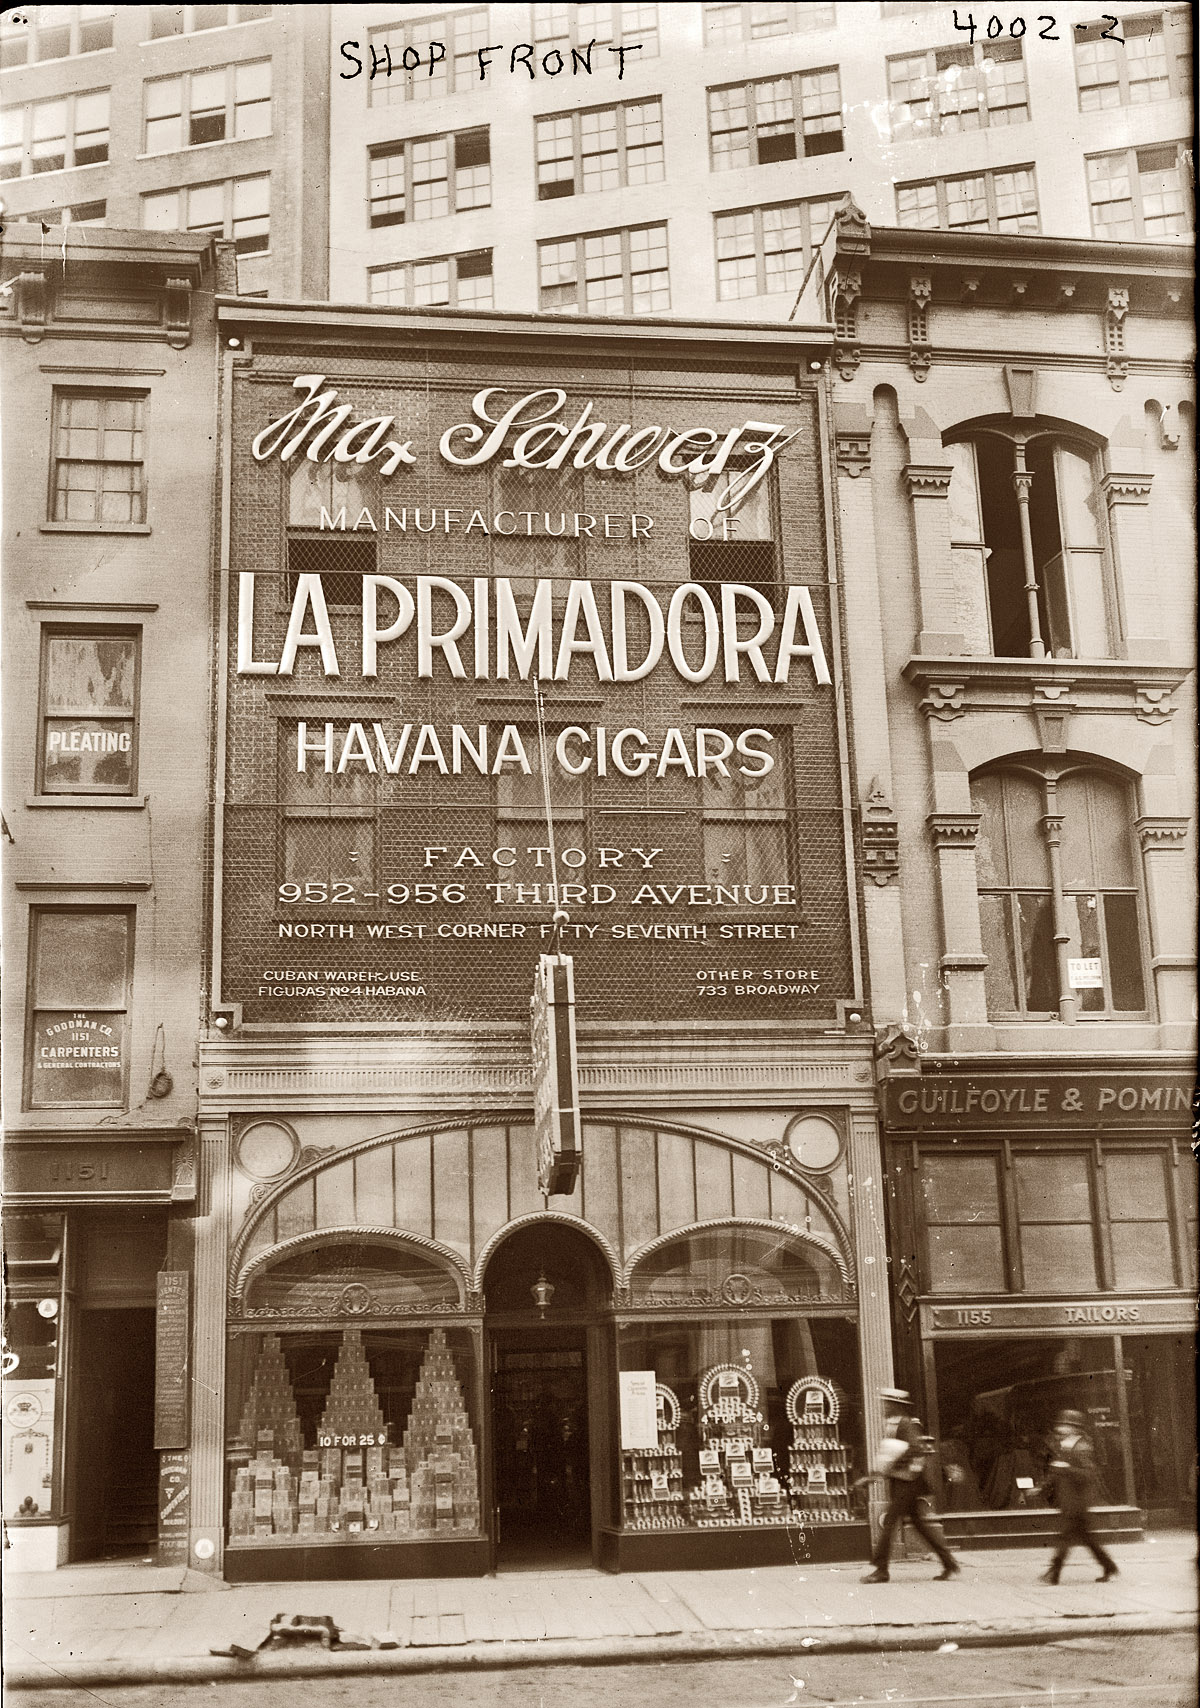 La Primadora cigar shop at 1153 Broadway in New York circa 1920. The owner, civic leader and entrepreneur Max Schwarz, died in 1940. View full size. 5x7 glass negative, George Grantham Bain Collection. Alternate view here.